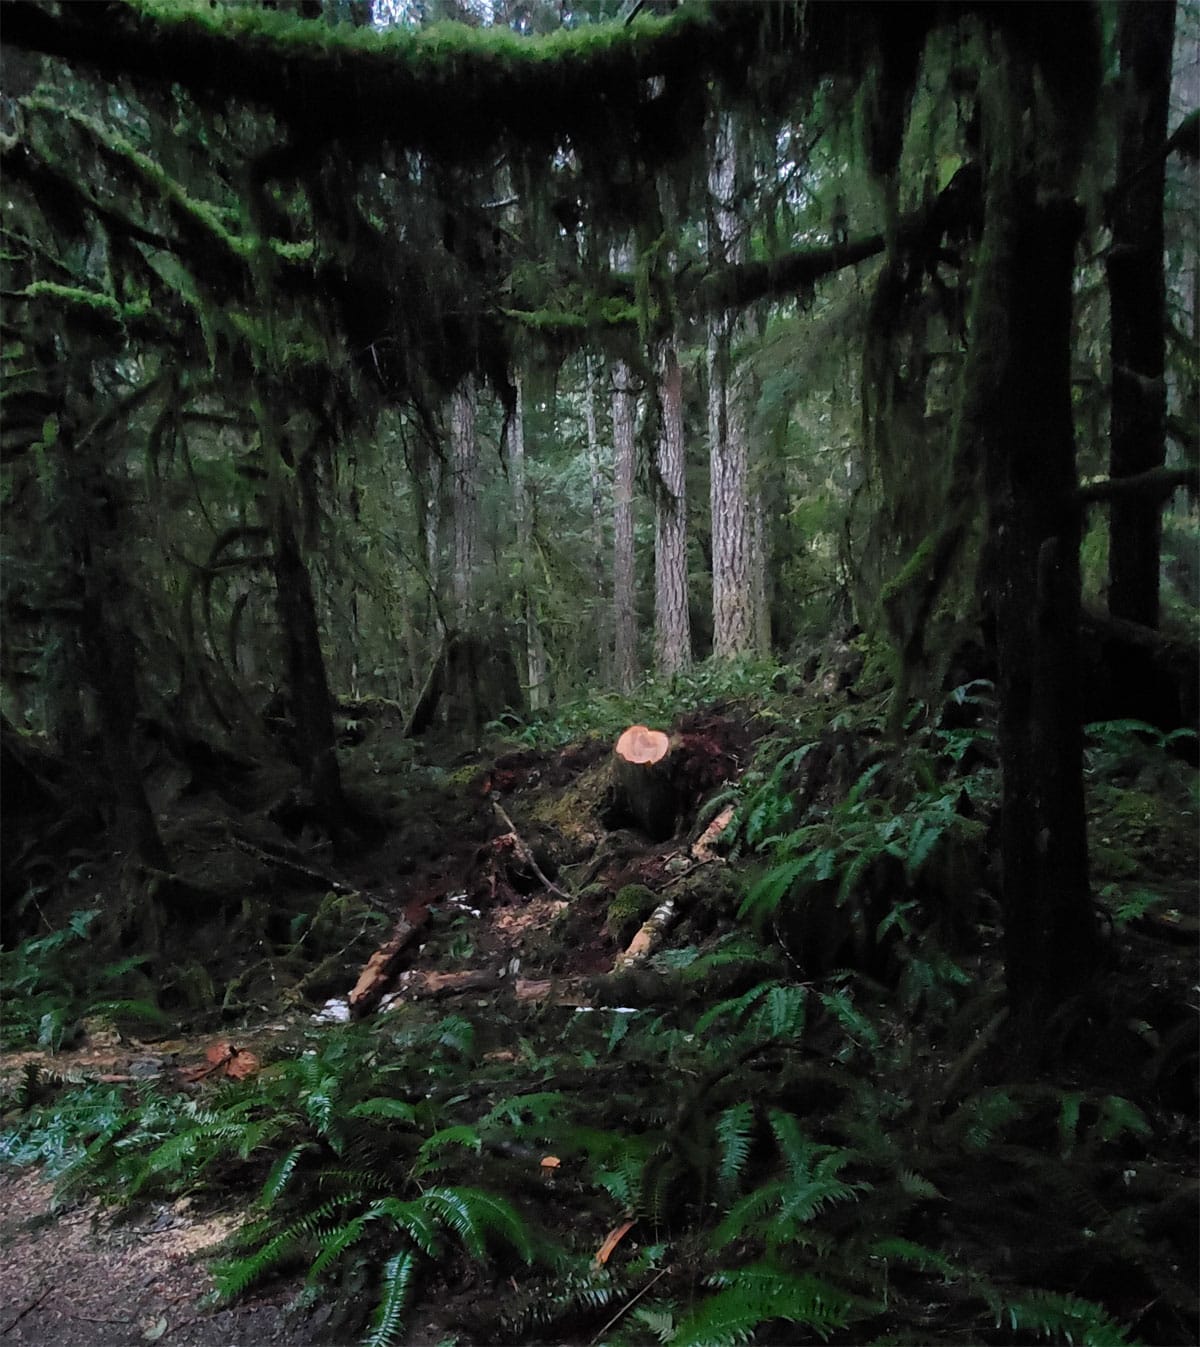 A photo of a dense forest tableau, with dark green, almost fuzzy-looking, leaves and branches framing an empty space in which sits a lone stump from a recently chopped-down tree, with some branch detritus littering the ground around it.